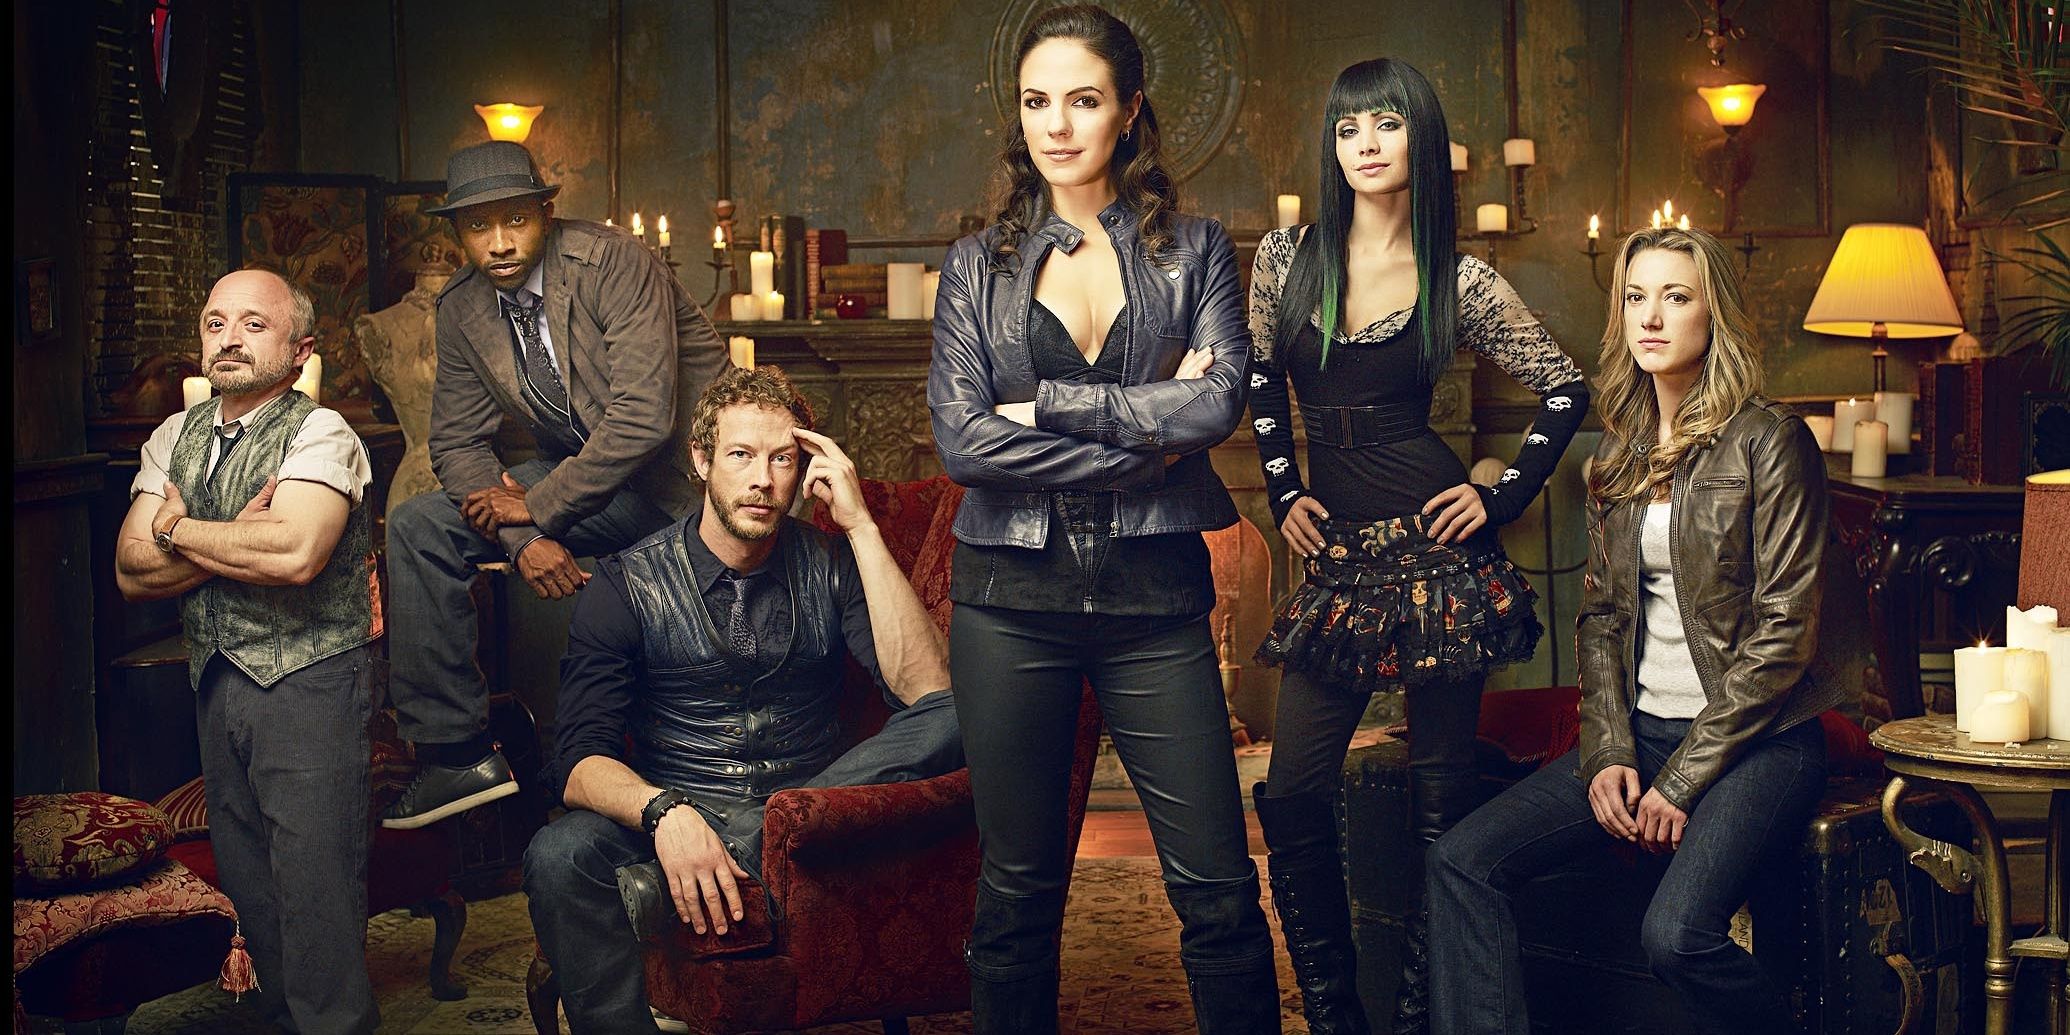 The cast of Lost Girl poses in a gothic lounge for a promotional picture